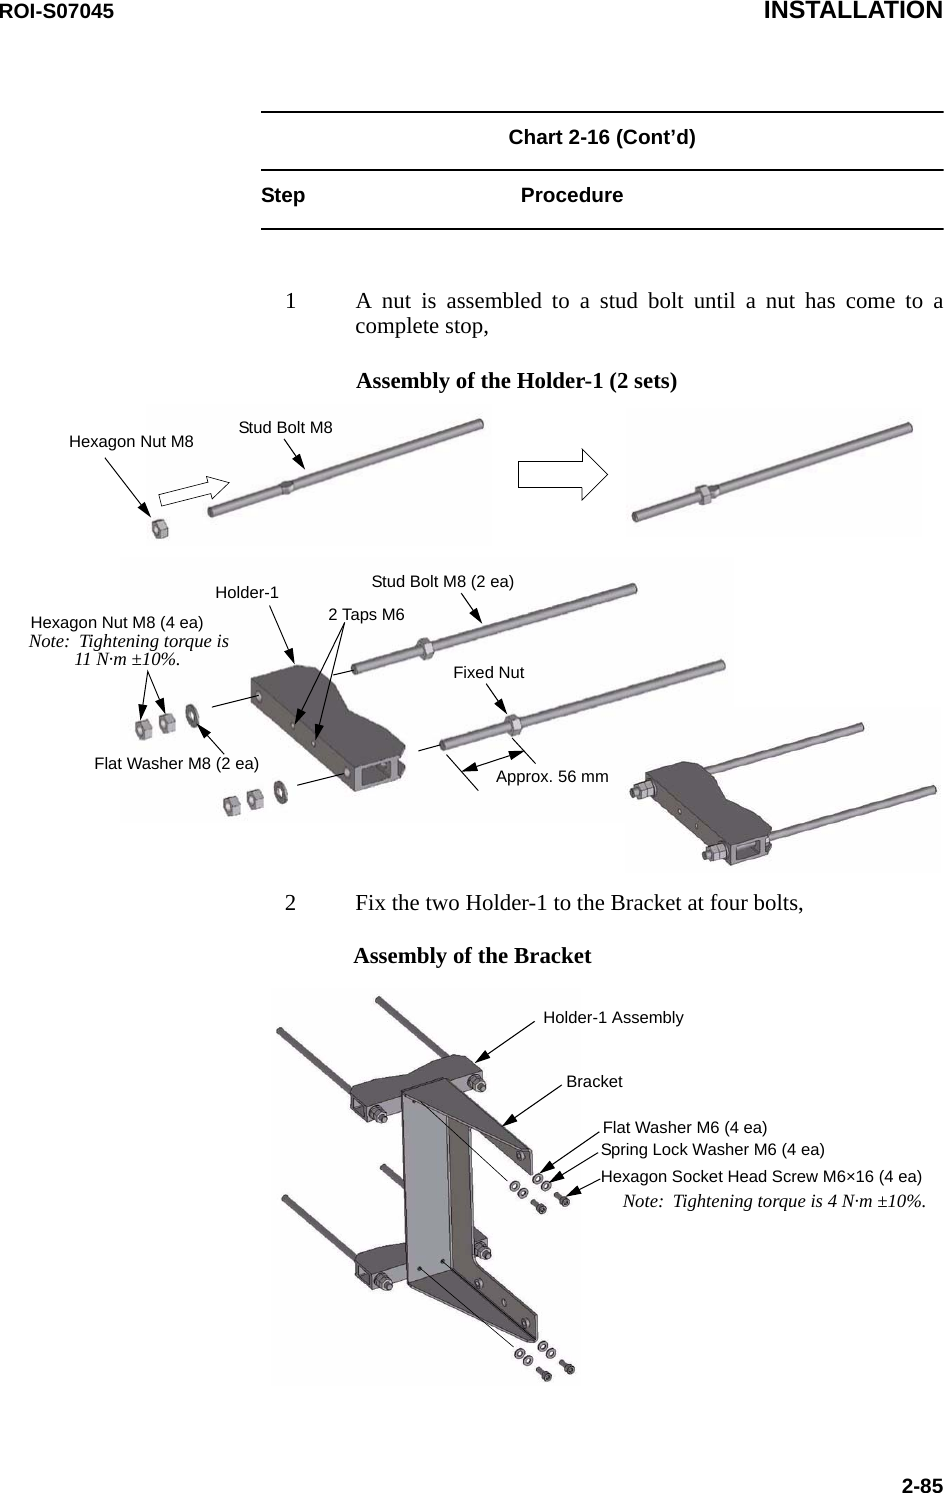 ROI-S07045 INSTALLATION2-85Chart 2-16 (Cont’d) Step Procedure1 A nut is assembled to a stud bolt until a nut has come to acomplete stop,2 Fix the two Holder-1 to the Bracket at four bolts,Stud Bolt M8Hexagon Nut M8Hexagon Nut M8 (4 ea)Stud Bolt M8 (2 ea)Fixed NutApprox. 56 mmHolder-1Flat Washer M8 (2 ea)Note:  Tightening torque is11 N·m ±10%.Assembly of the Holder-1 (2 sets)2 Taps M6Assembly of the BracketHolder-1 AssemblyBracketFlat Washer M6 (4 ea)Spring Lock Washer M6 (4 ea)Hexagon Socket Head Screw M6×16 (4 ea)Note:  Tightening torque is 4 N·m ±10%.